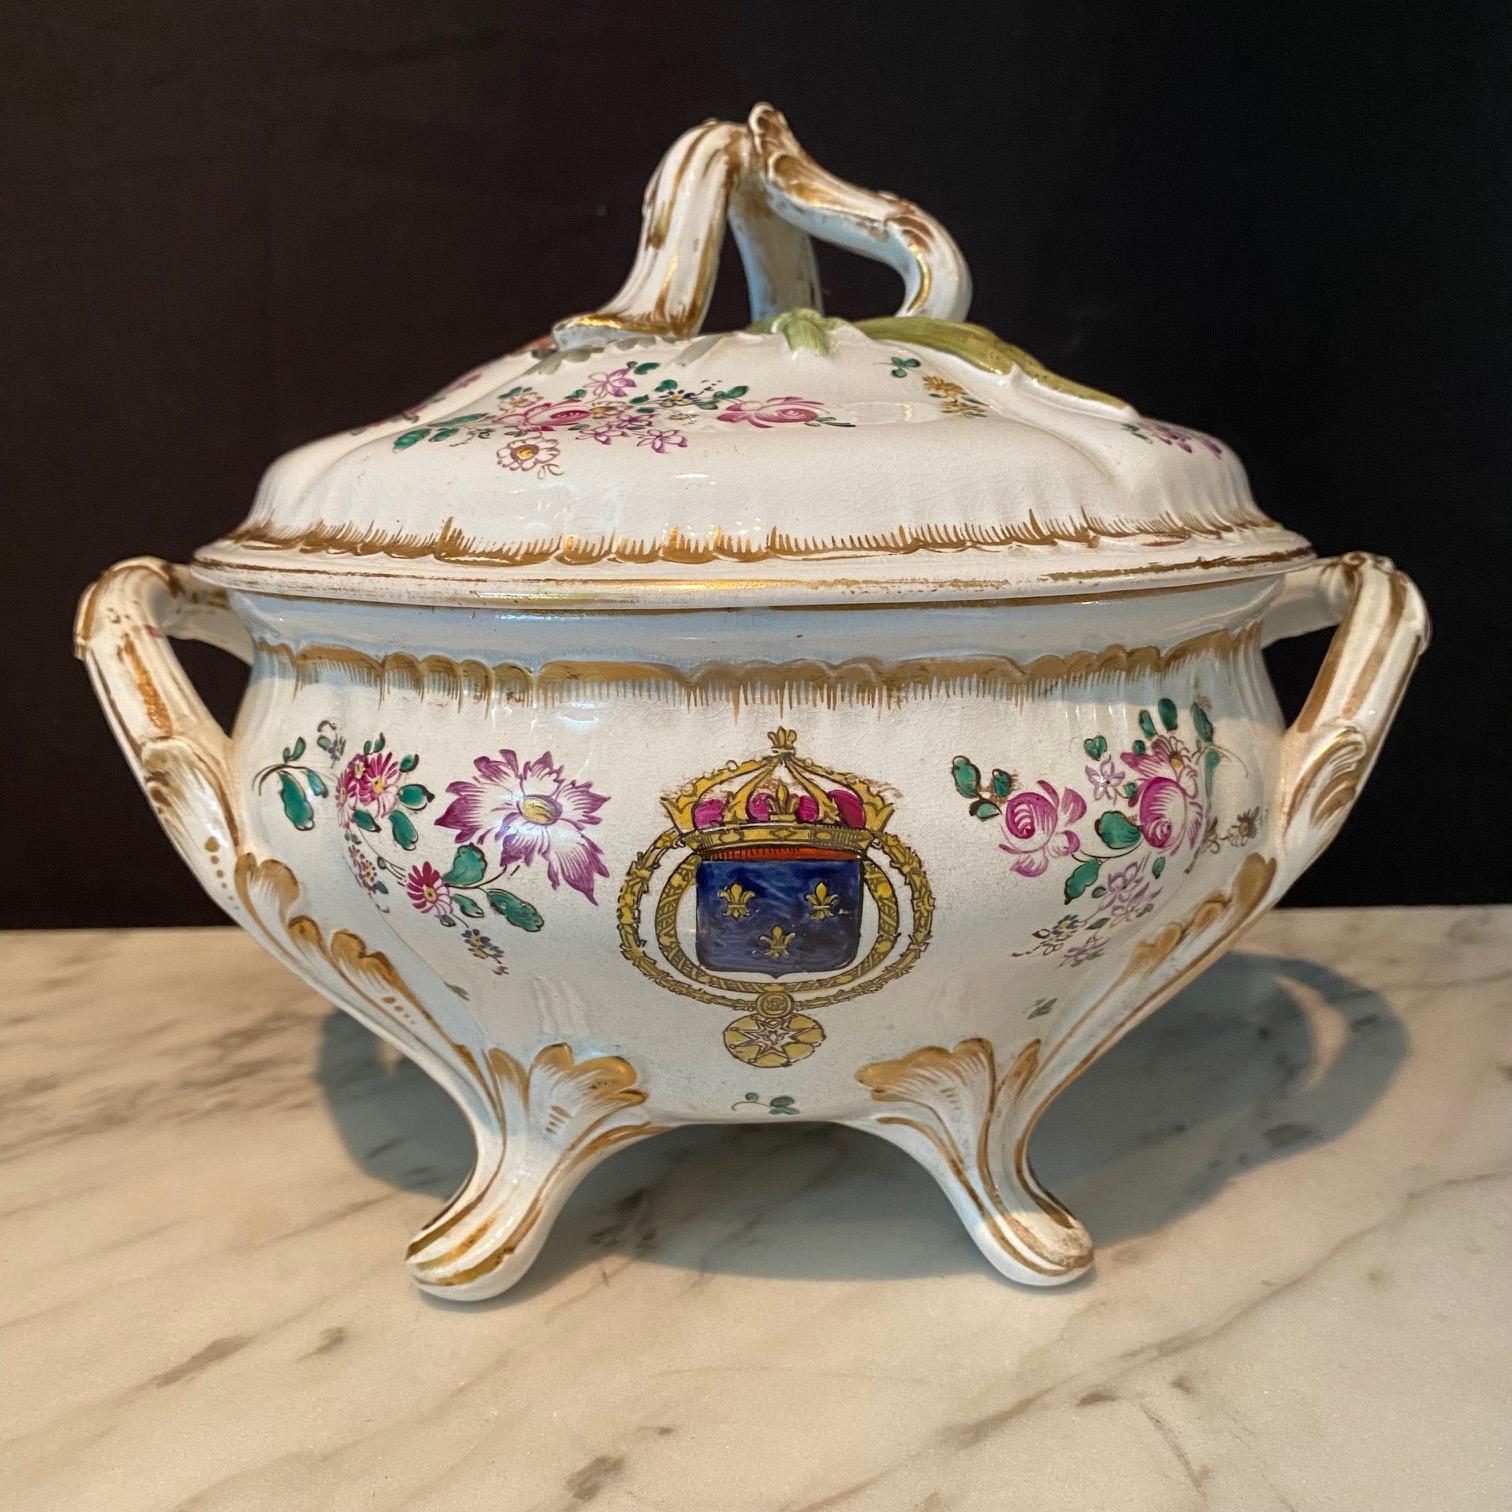 Pair French Hand Painted Faience Porcelain Soup Tureens with Coats of Arms In Good Condition For Sale In Hopewell, NJ